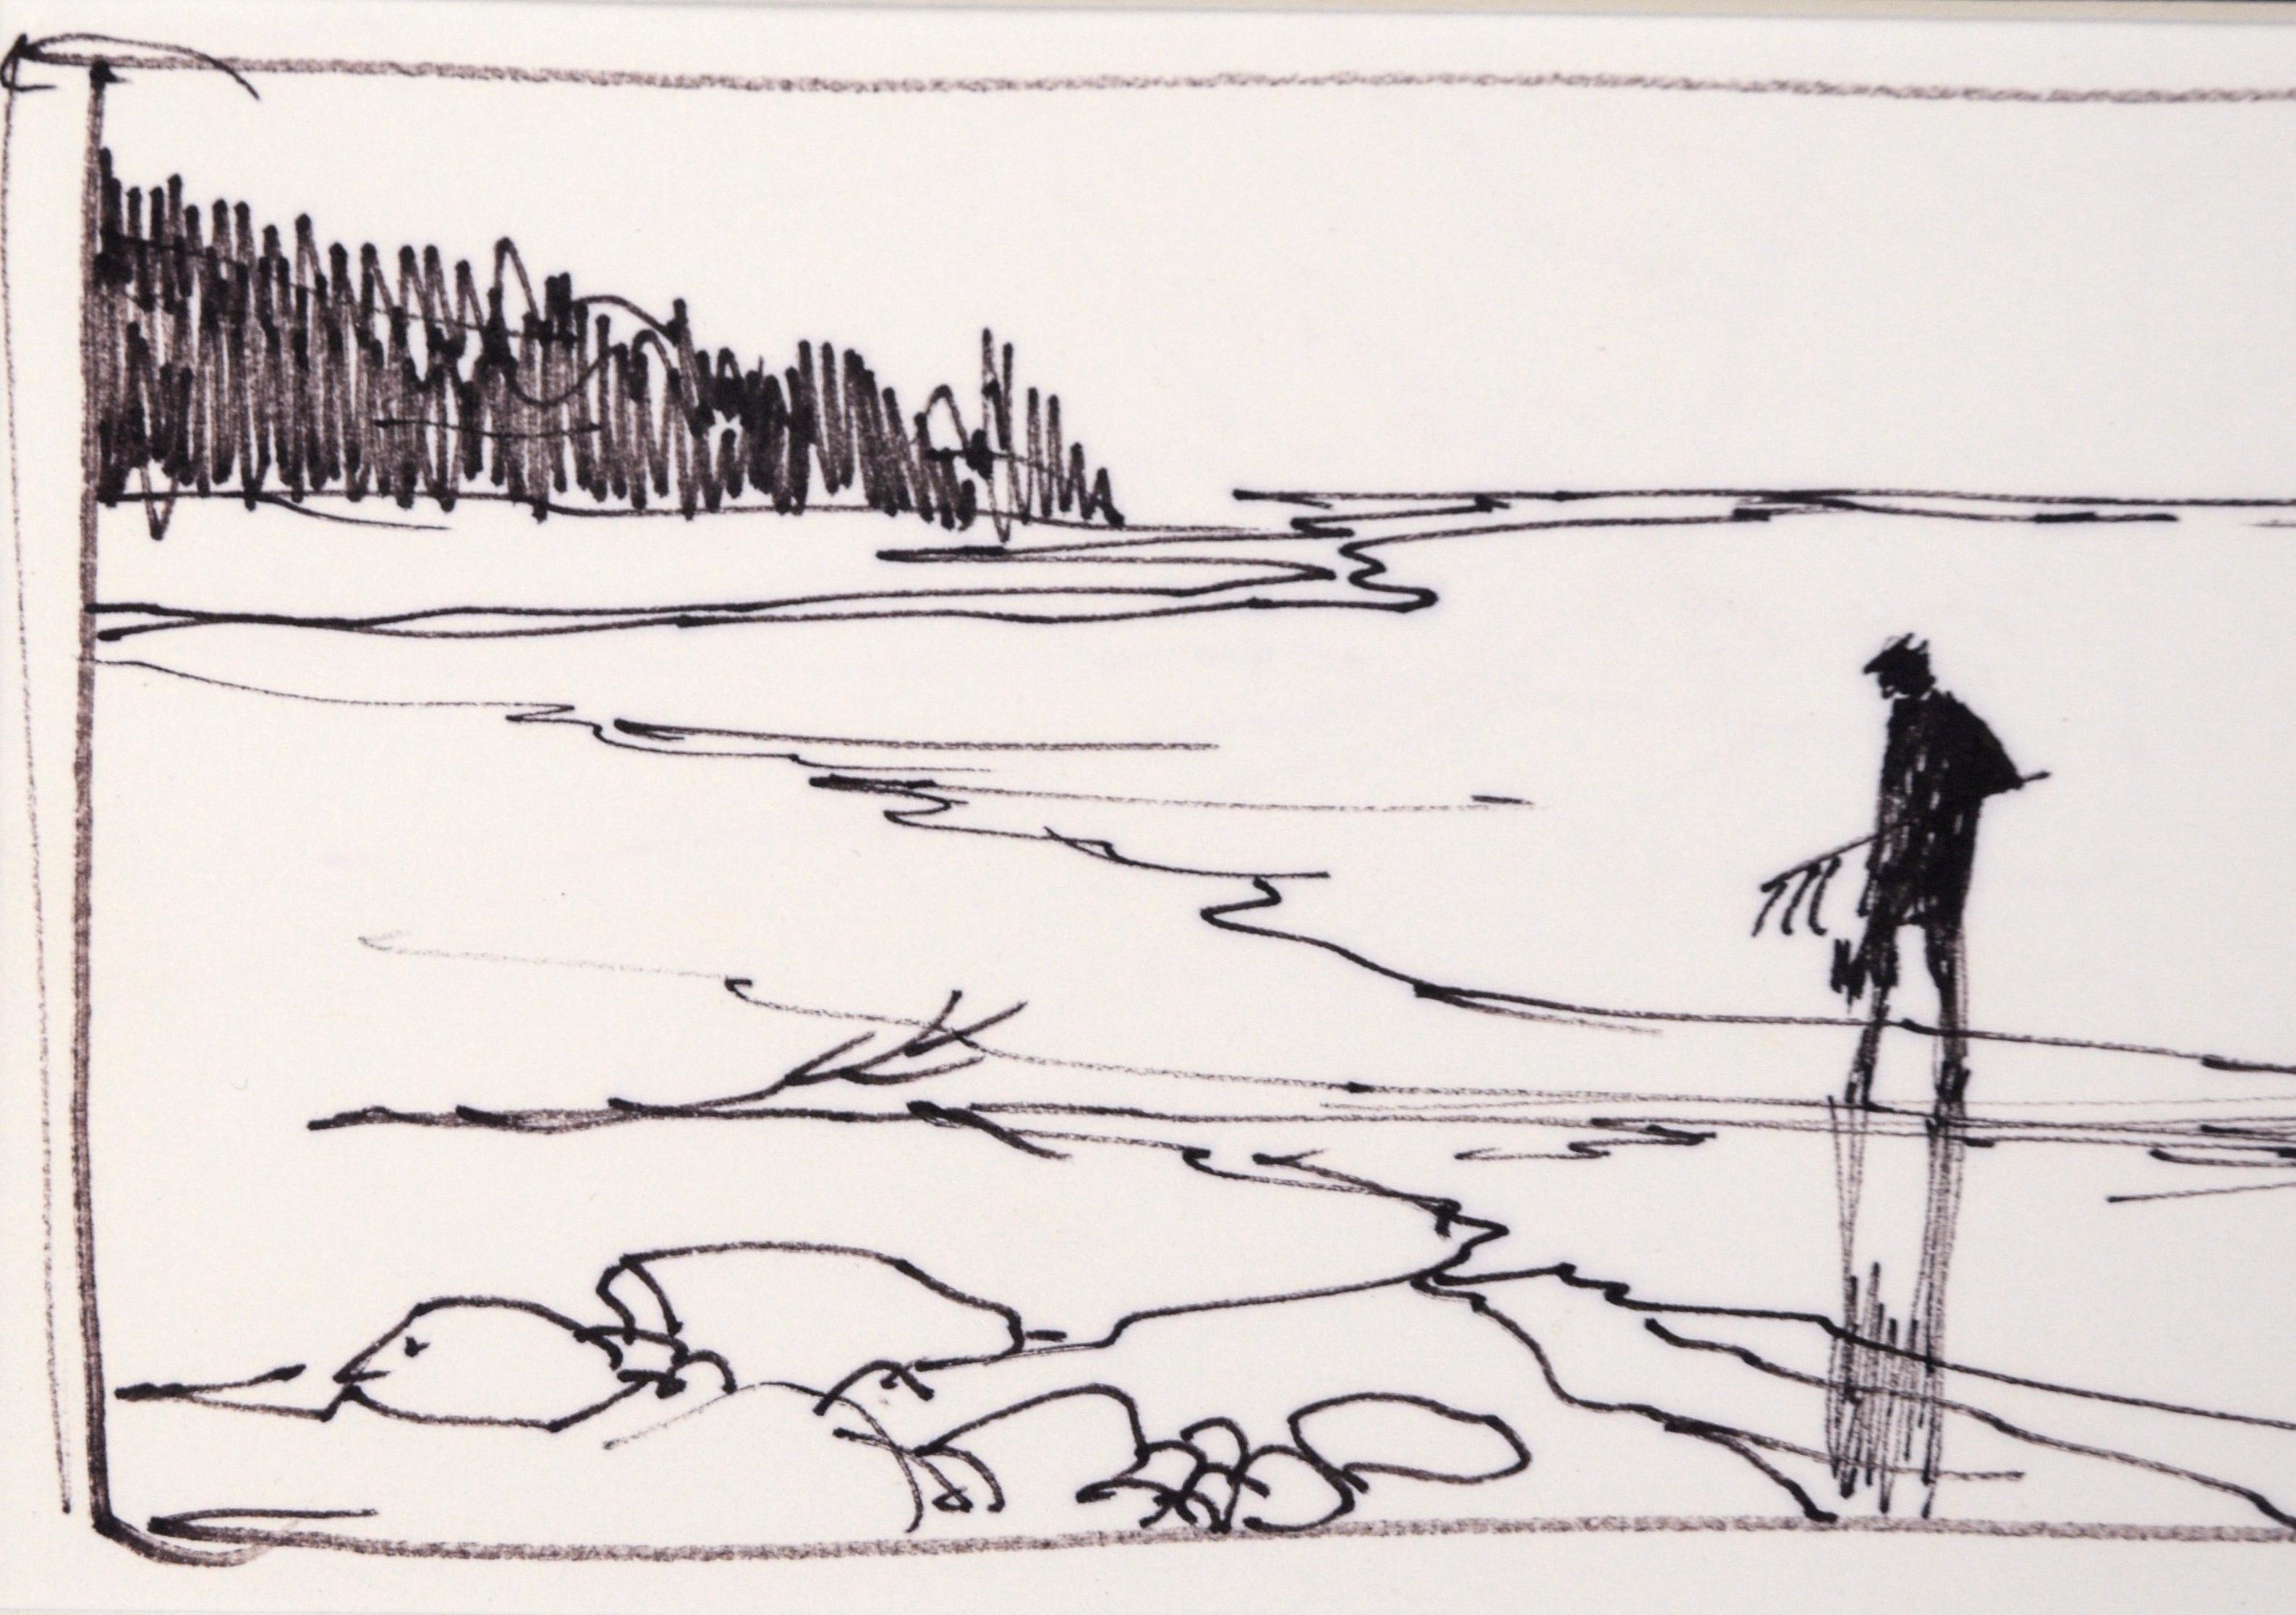 Beachcomber  with Clam Rake - Line Drawing Landscape in Ink on Paper - American Impressionist Art by Laurence Sisson